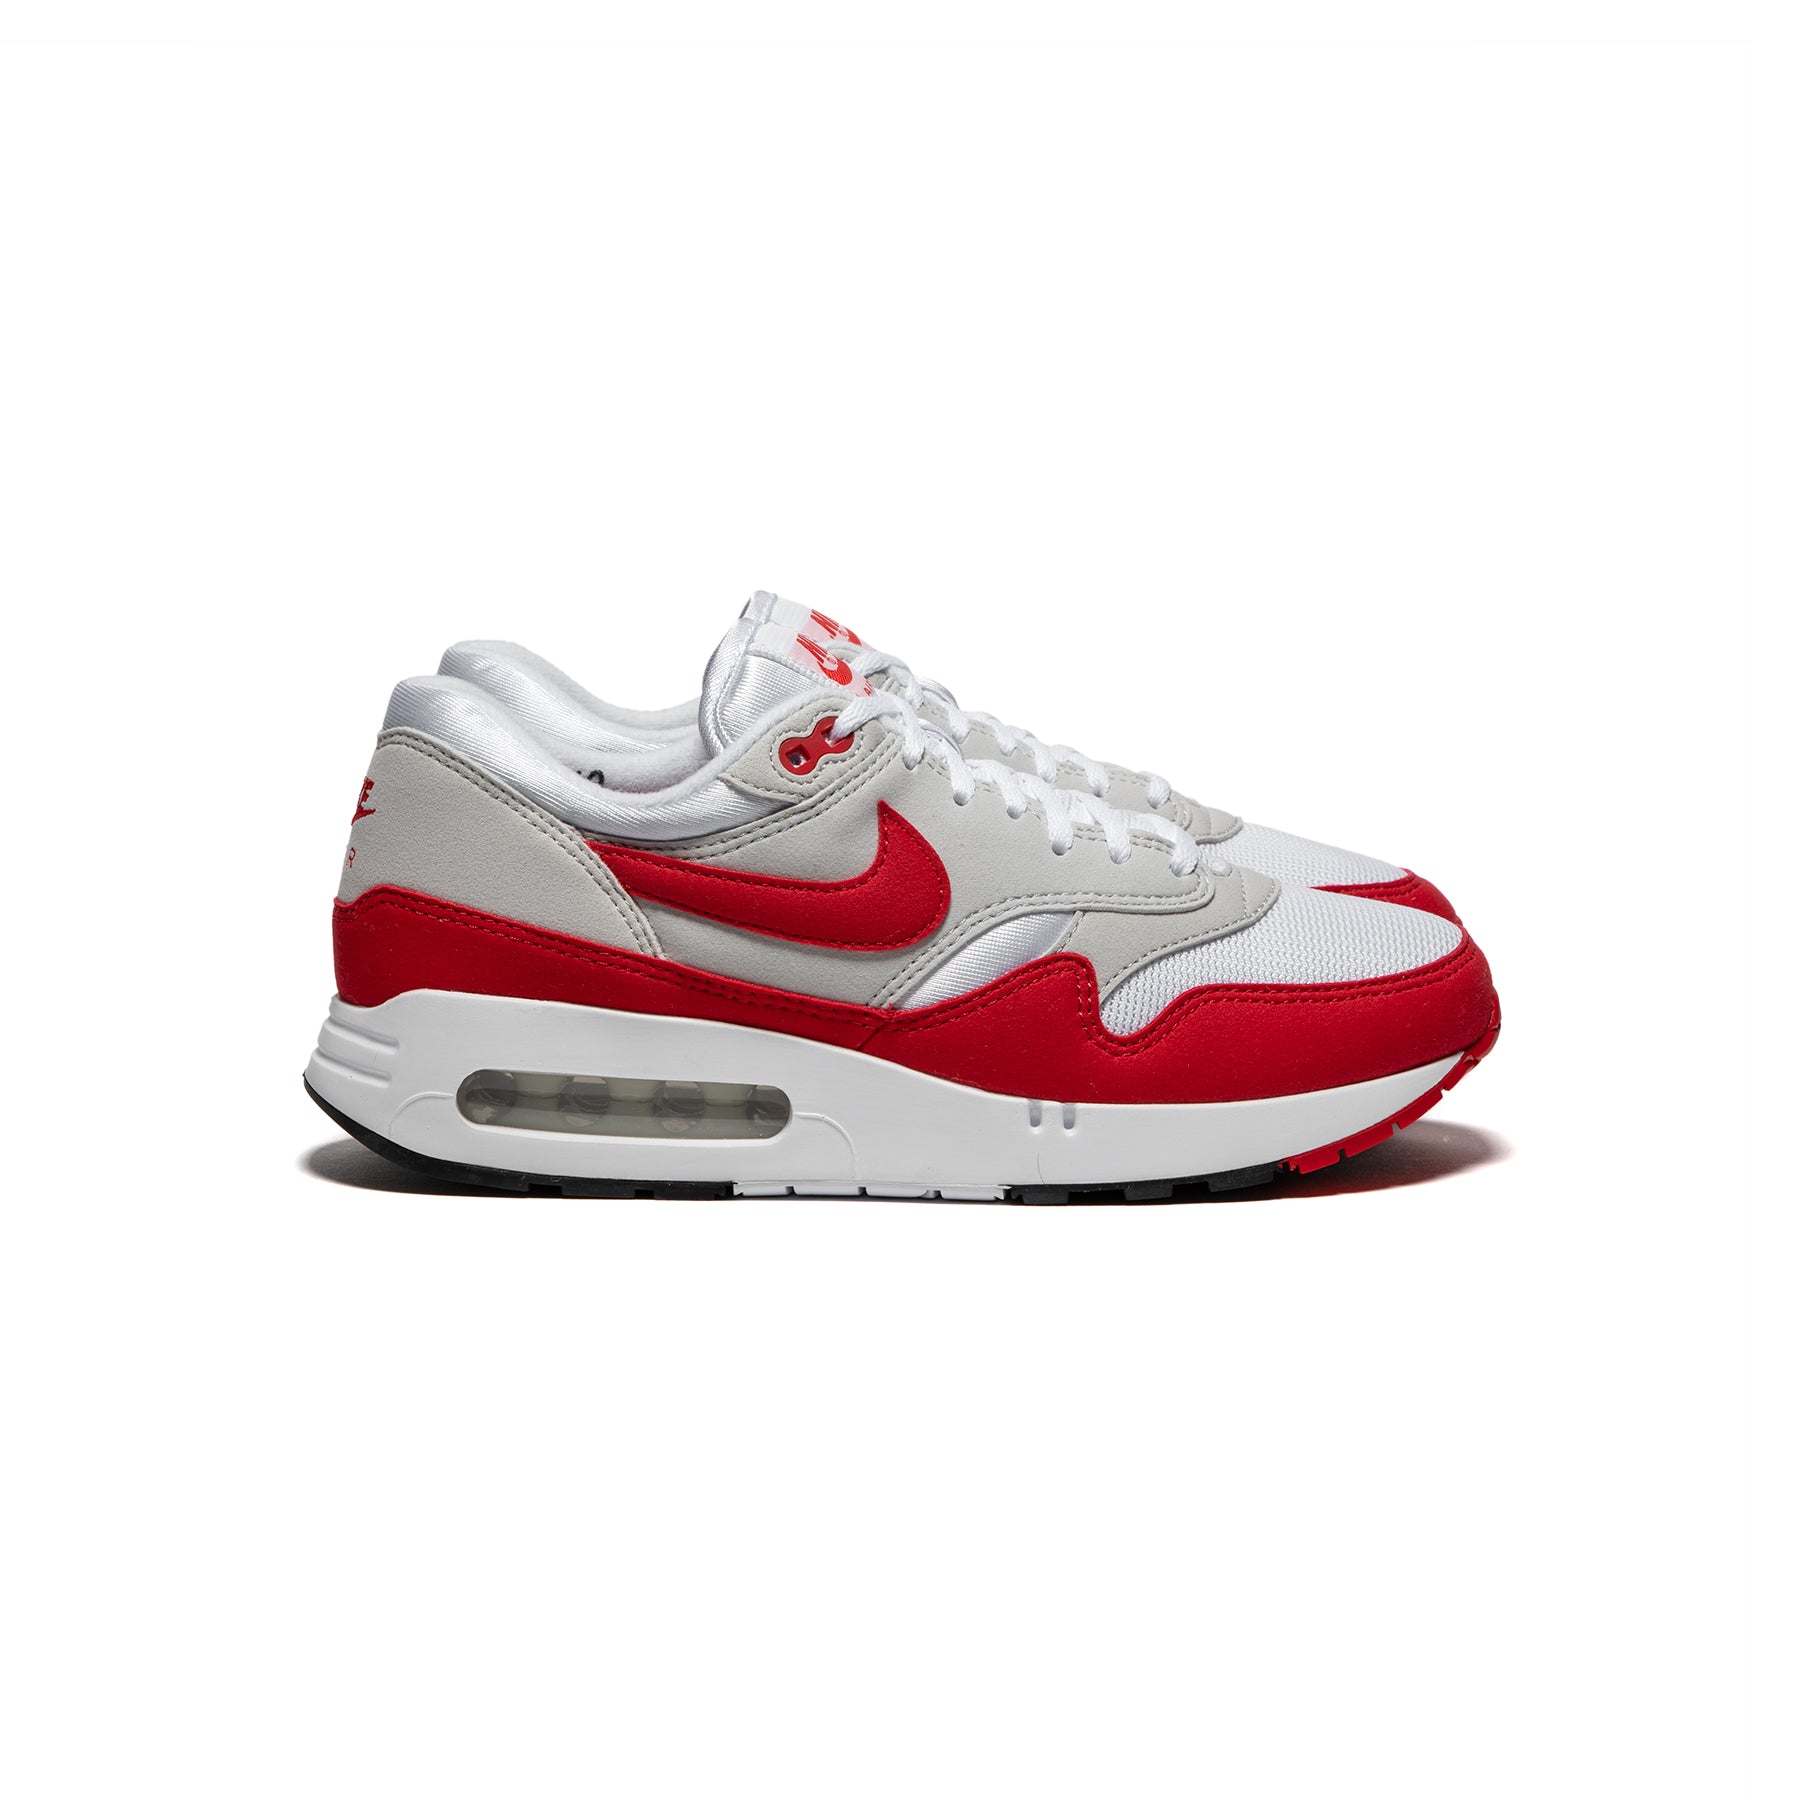 Nike Womens Air Max '86 (White/University Red/Light Neutral Concepts